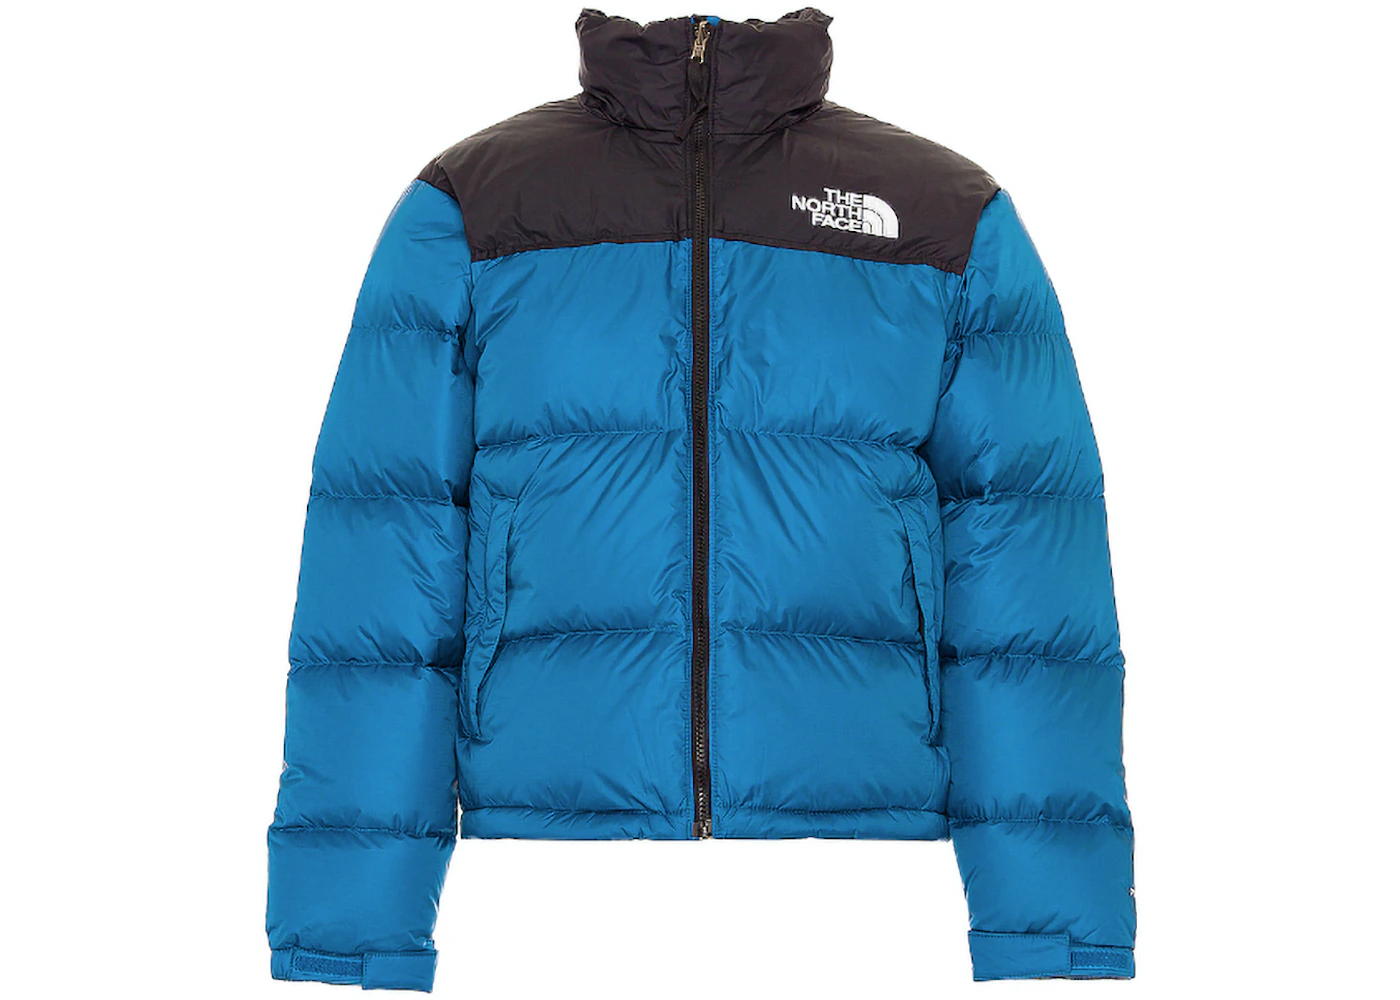 The North Face 1996 Retro Nuptse 700 Fill Packable Jacket Banff Blue ...